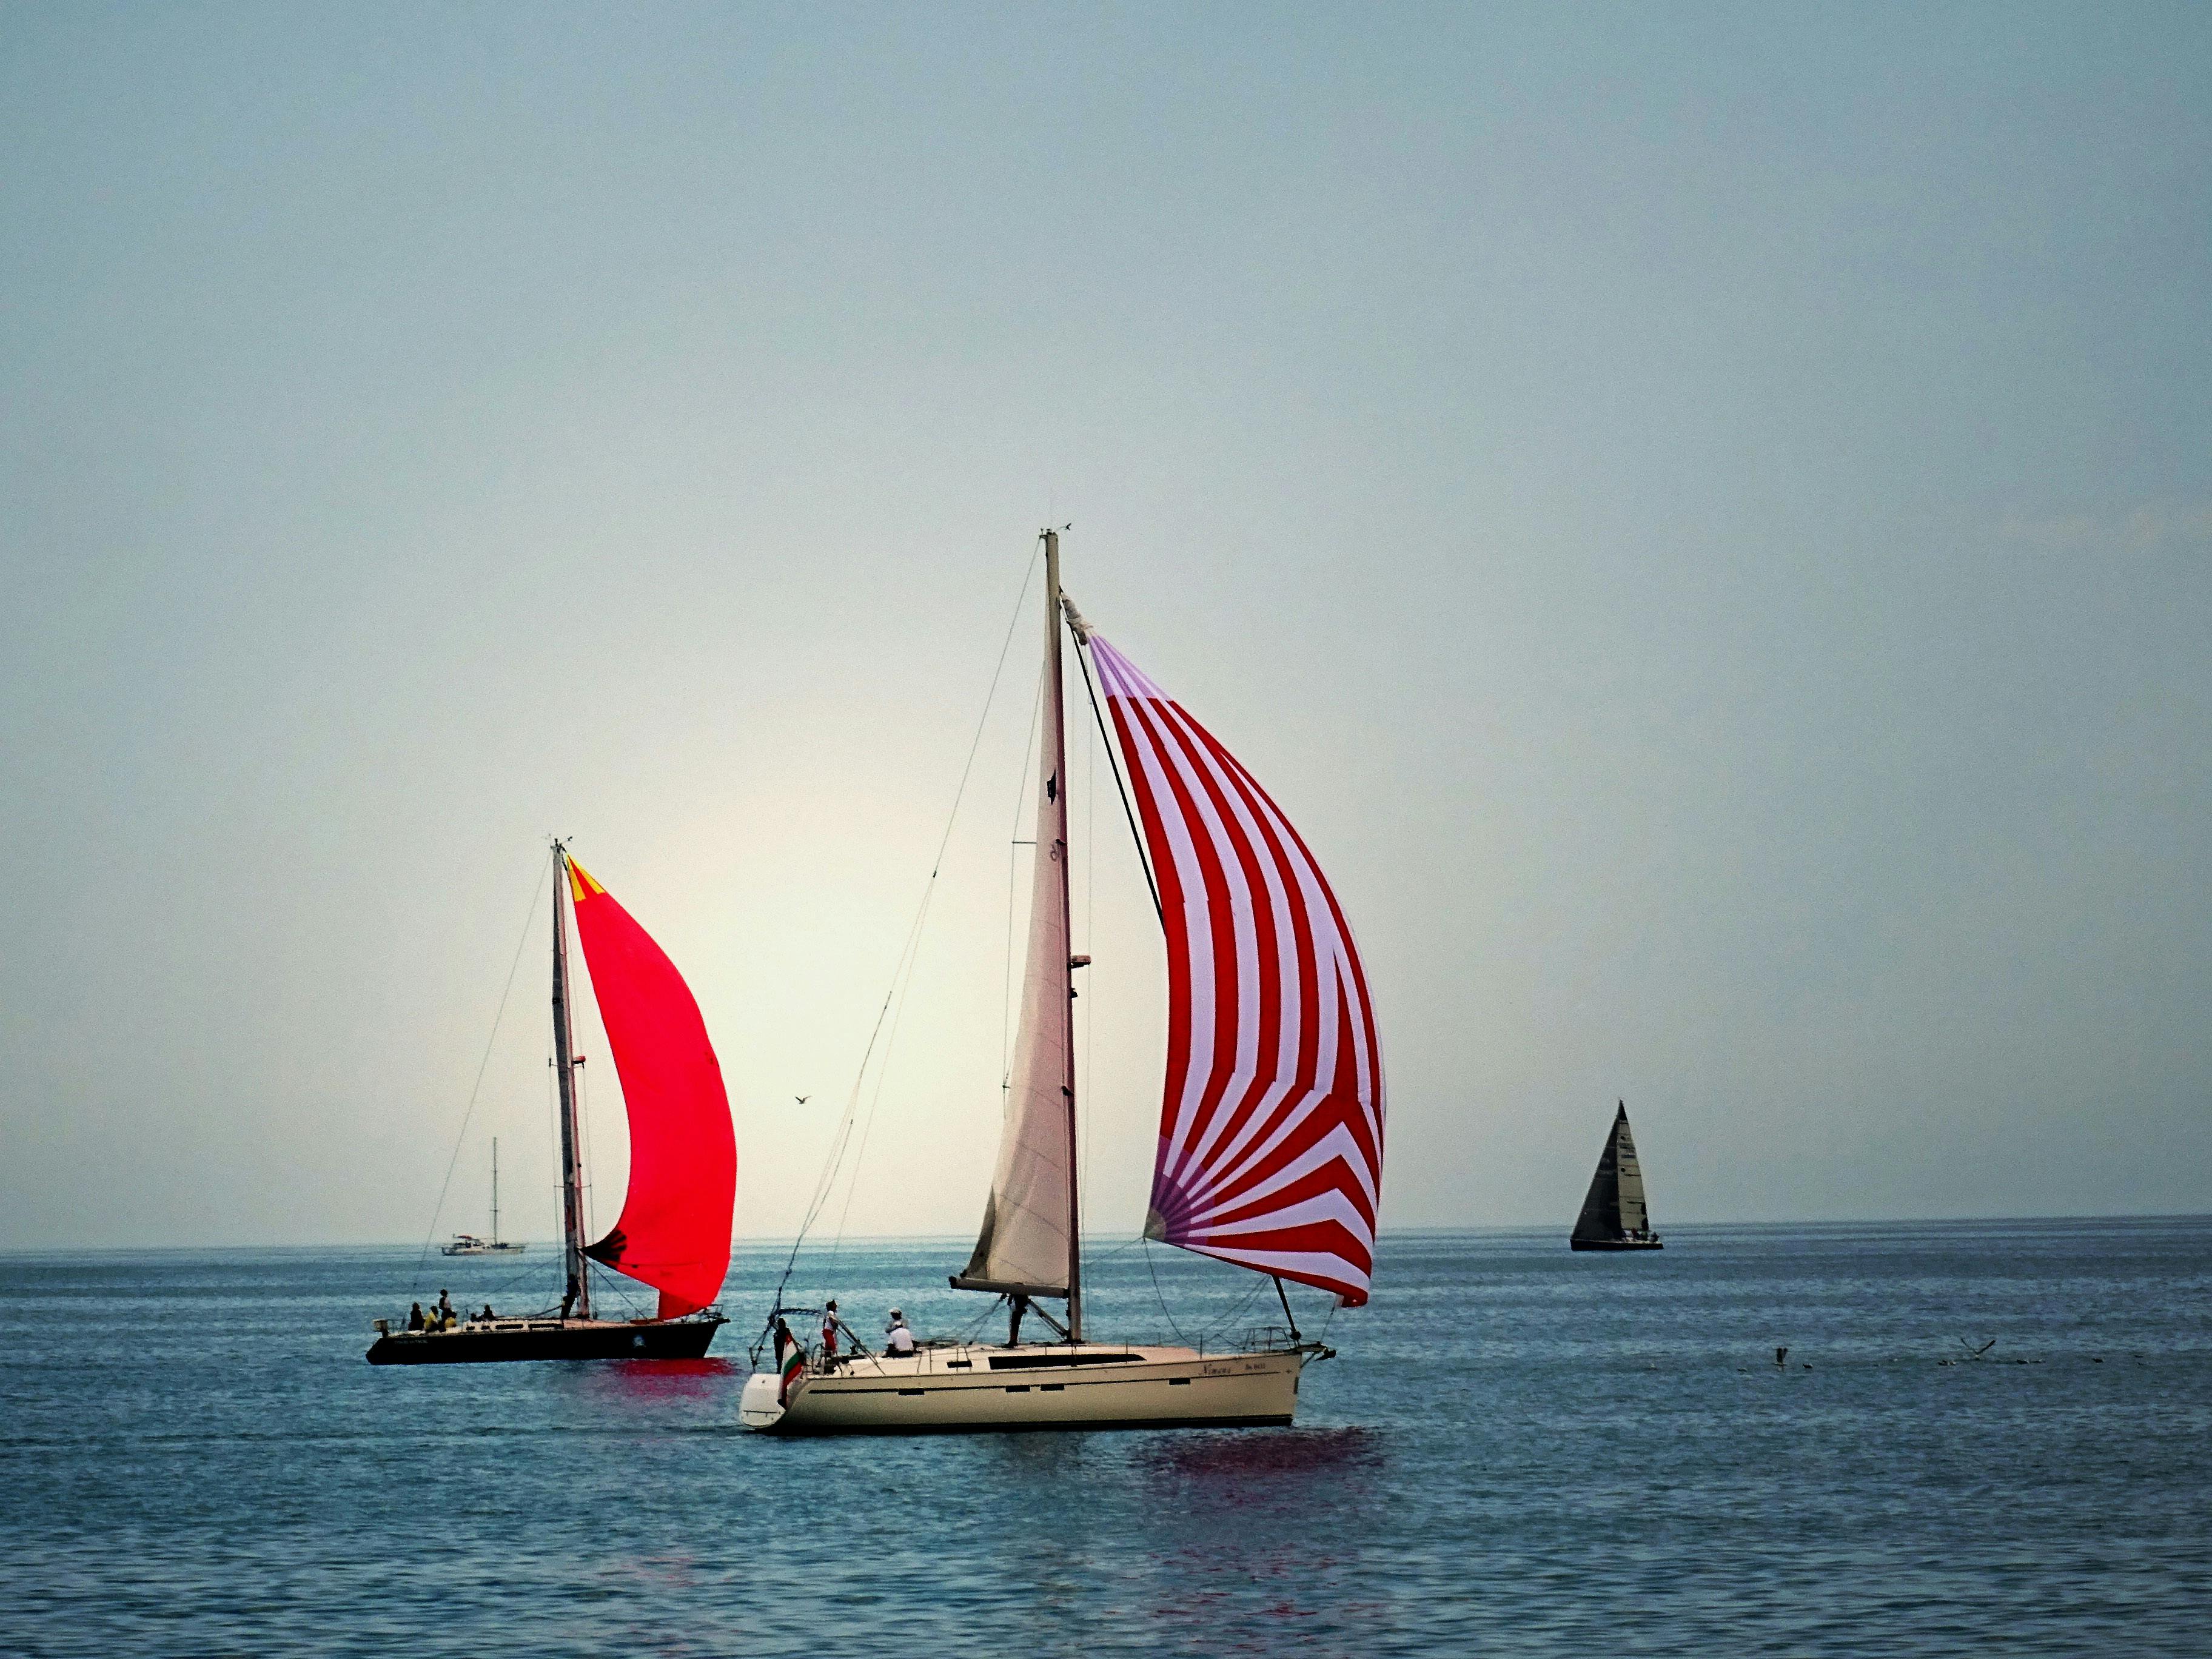 pictures of sailboats on the water